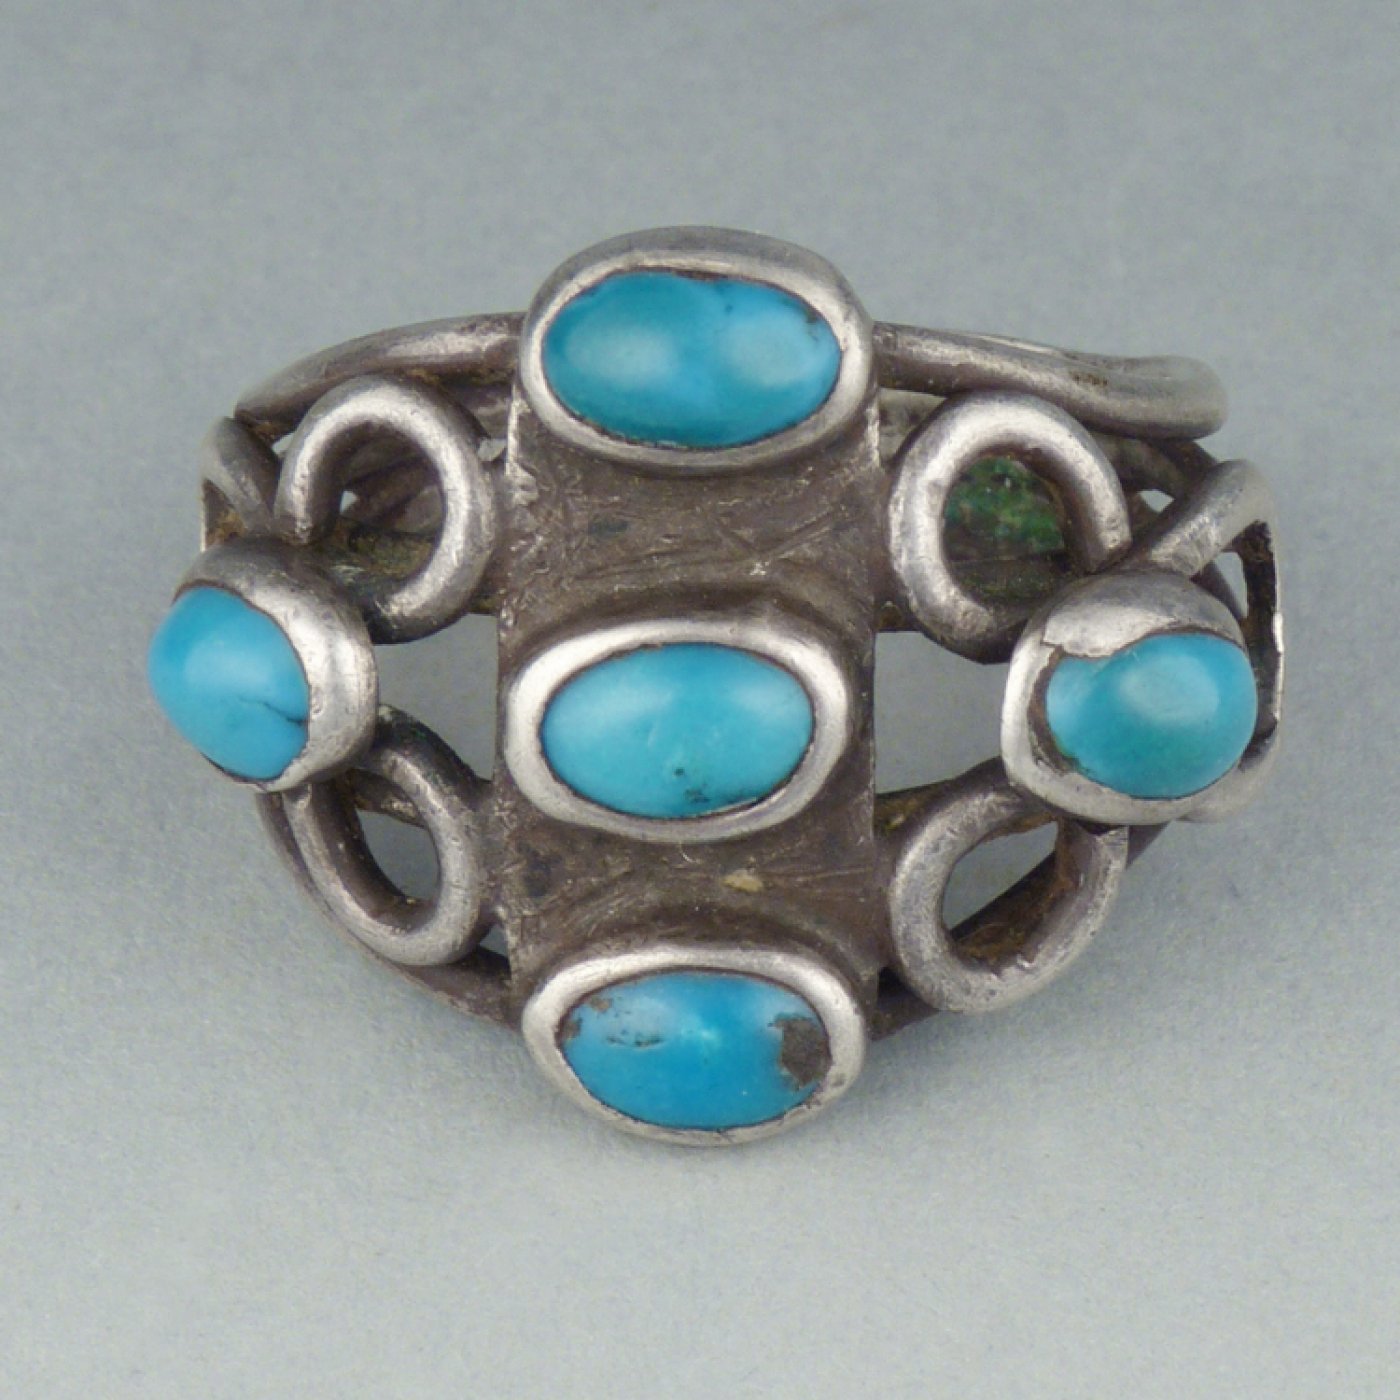 Navajo Silver Ring with Five Turquoise Cabochons, c.1920 | Shiprock ...